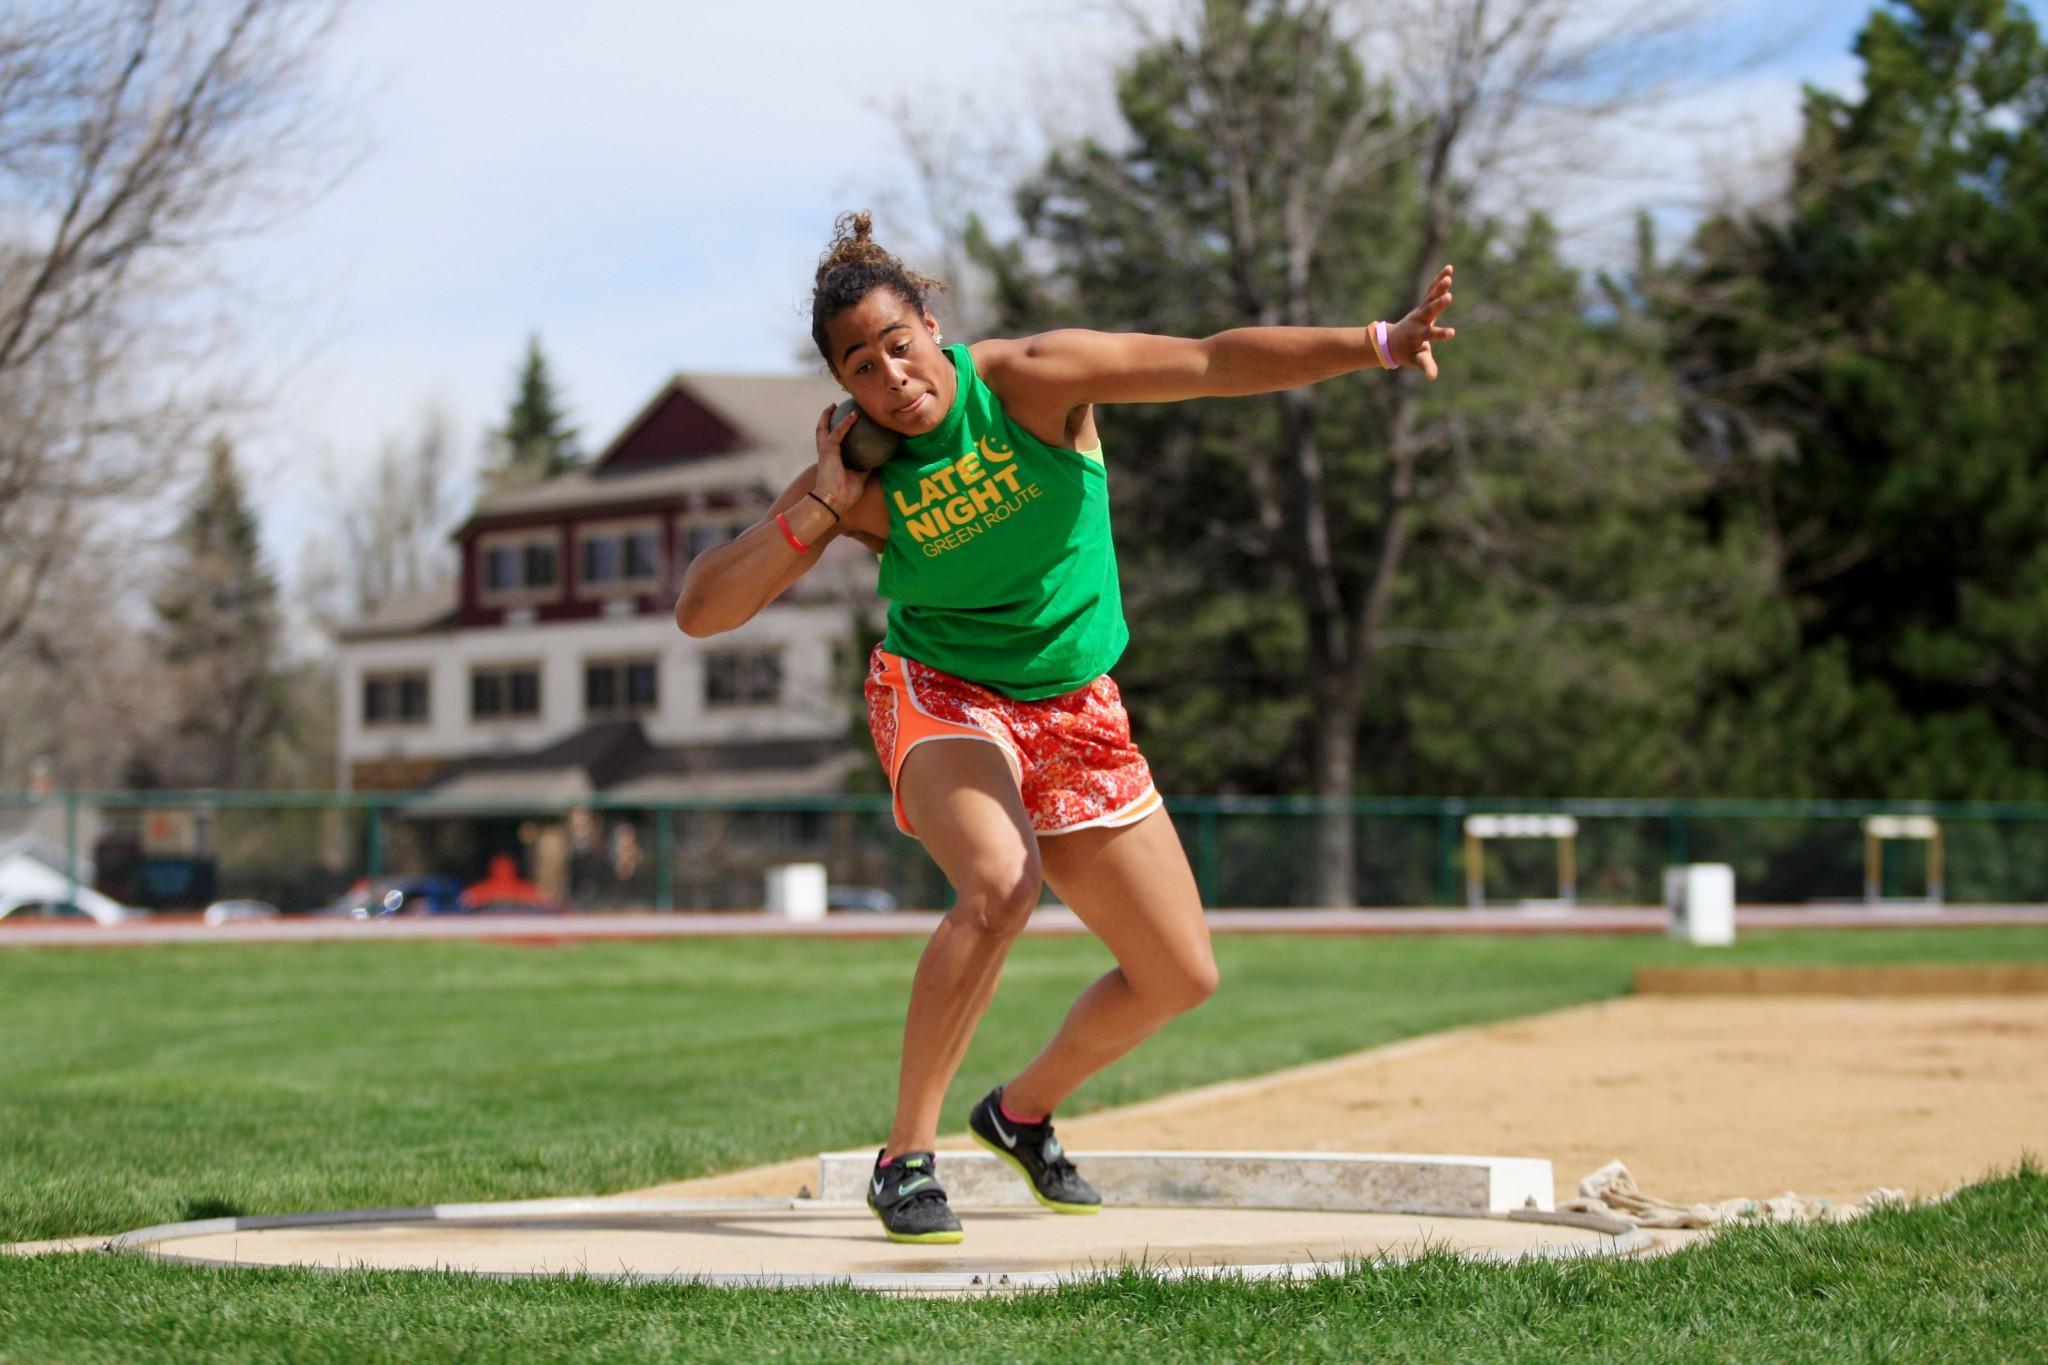 An athlete with a lot of shinning potential, Kiah Hicks exercises her throwing arm Tuesday afternoon in preperation for the Las Vegas meet this coming Saturday.